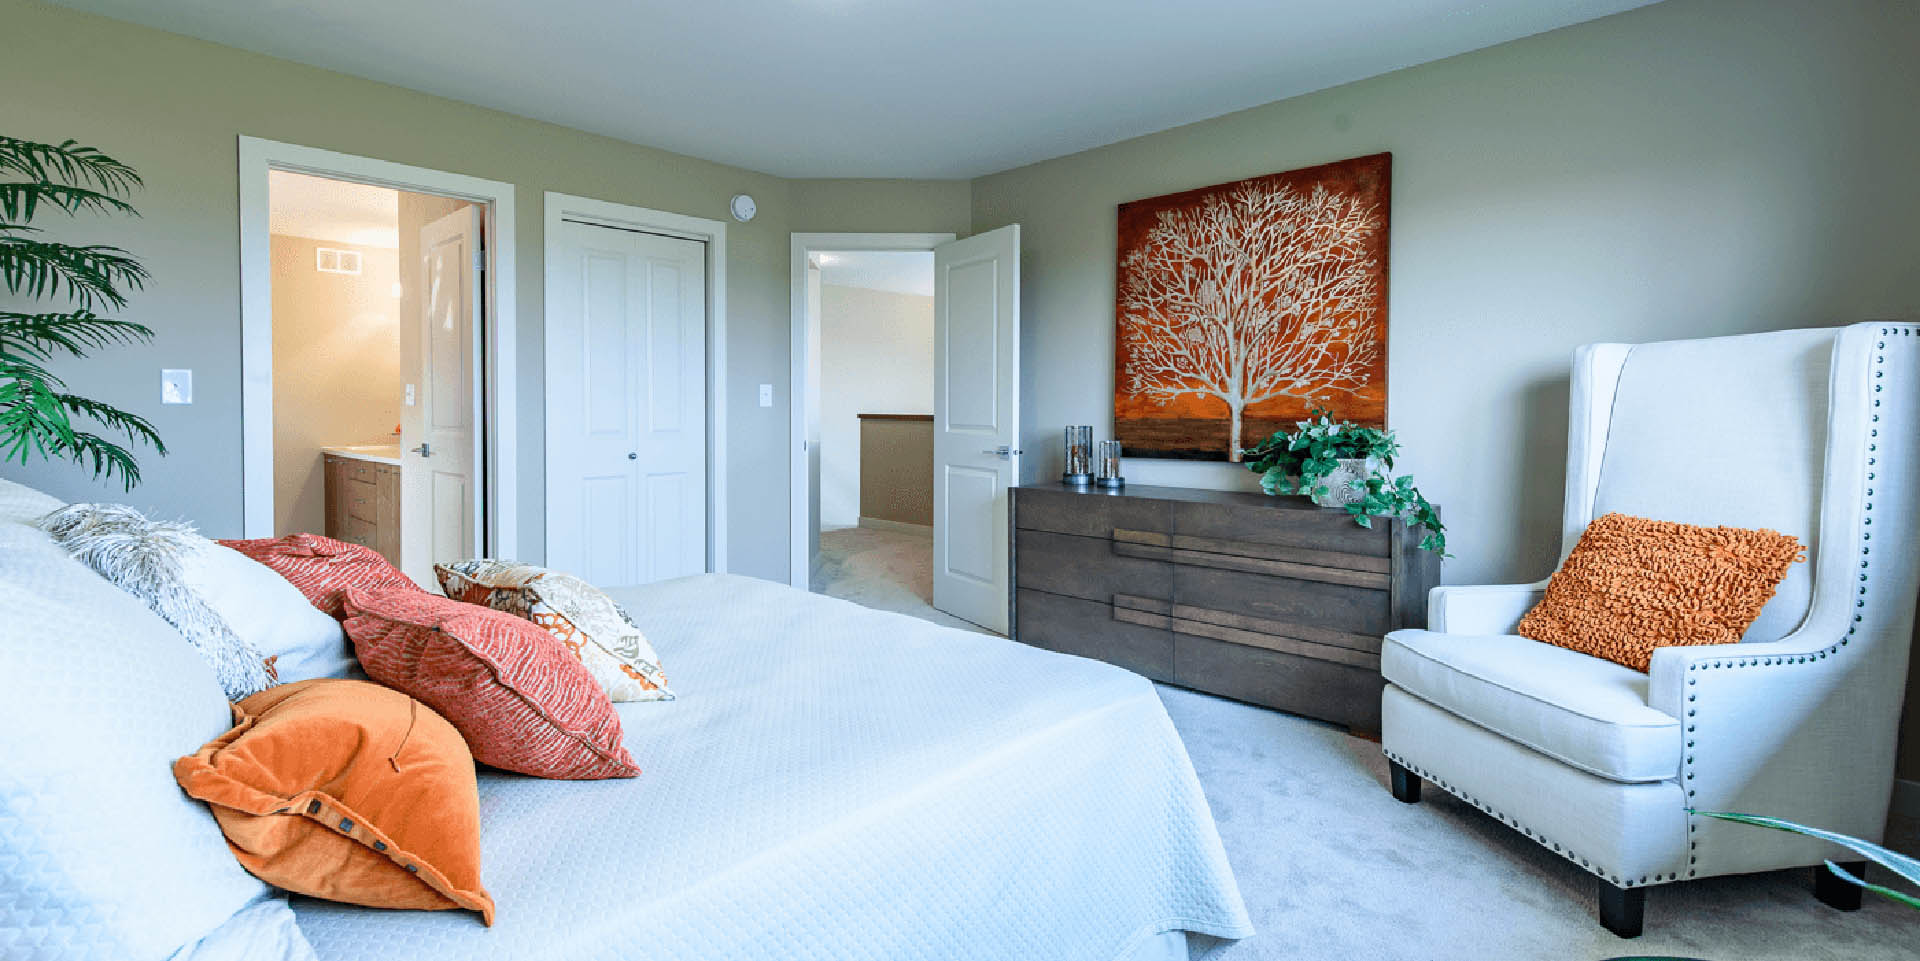 Decorating Your Master Bedroom:Our Top Design Ideas Orange Featured Image